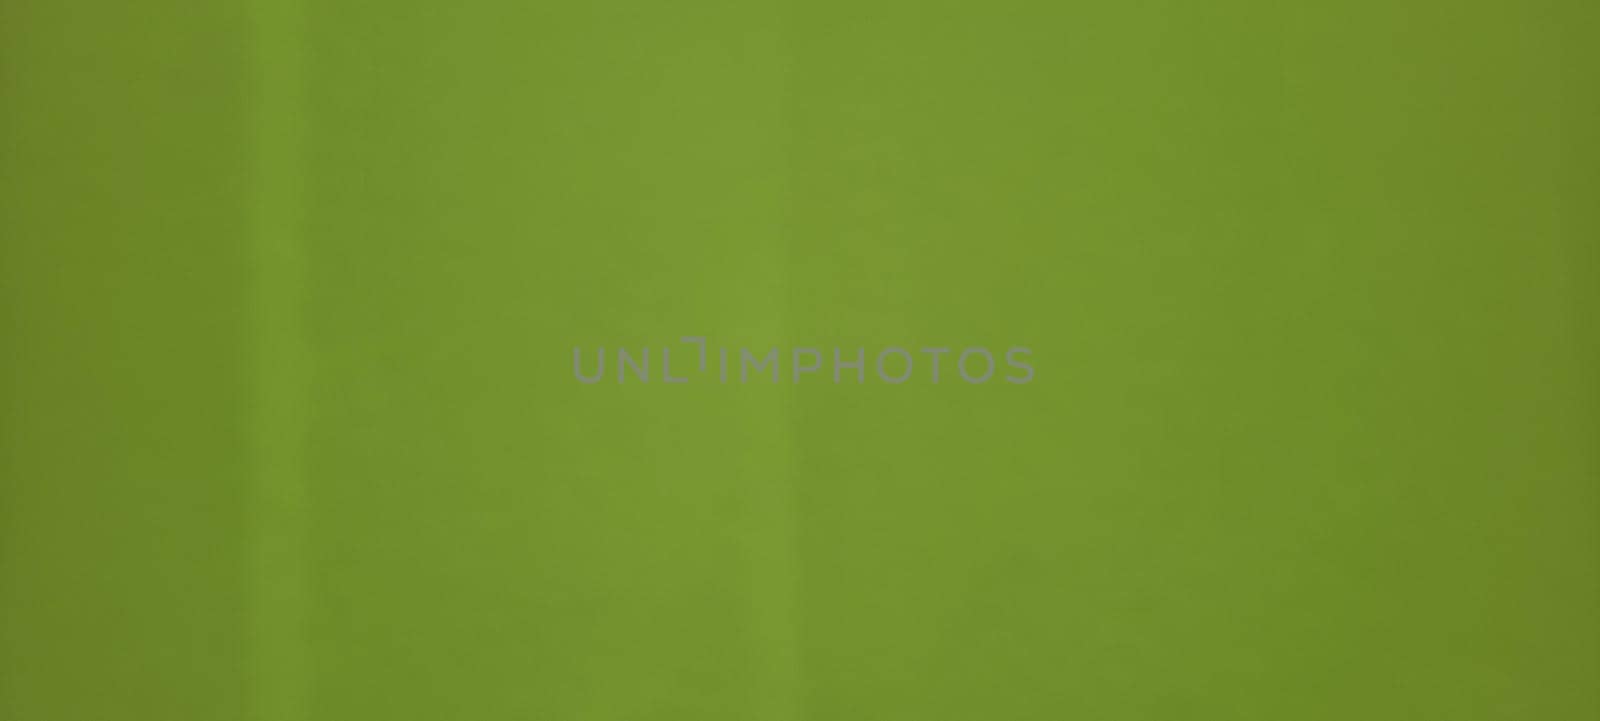 light green panel that can be used as a background, green texture